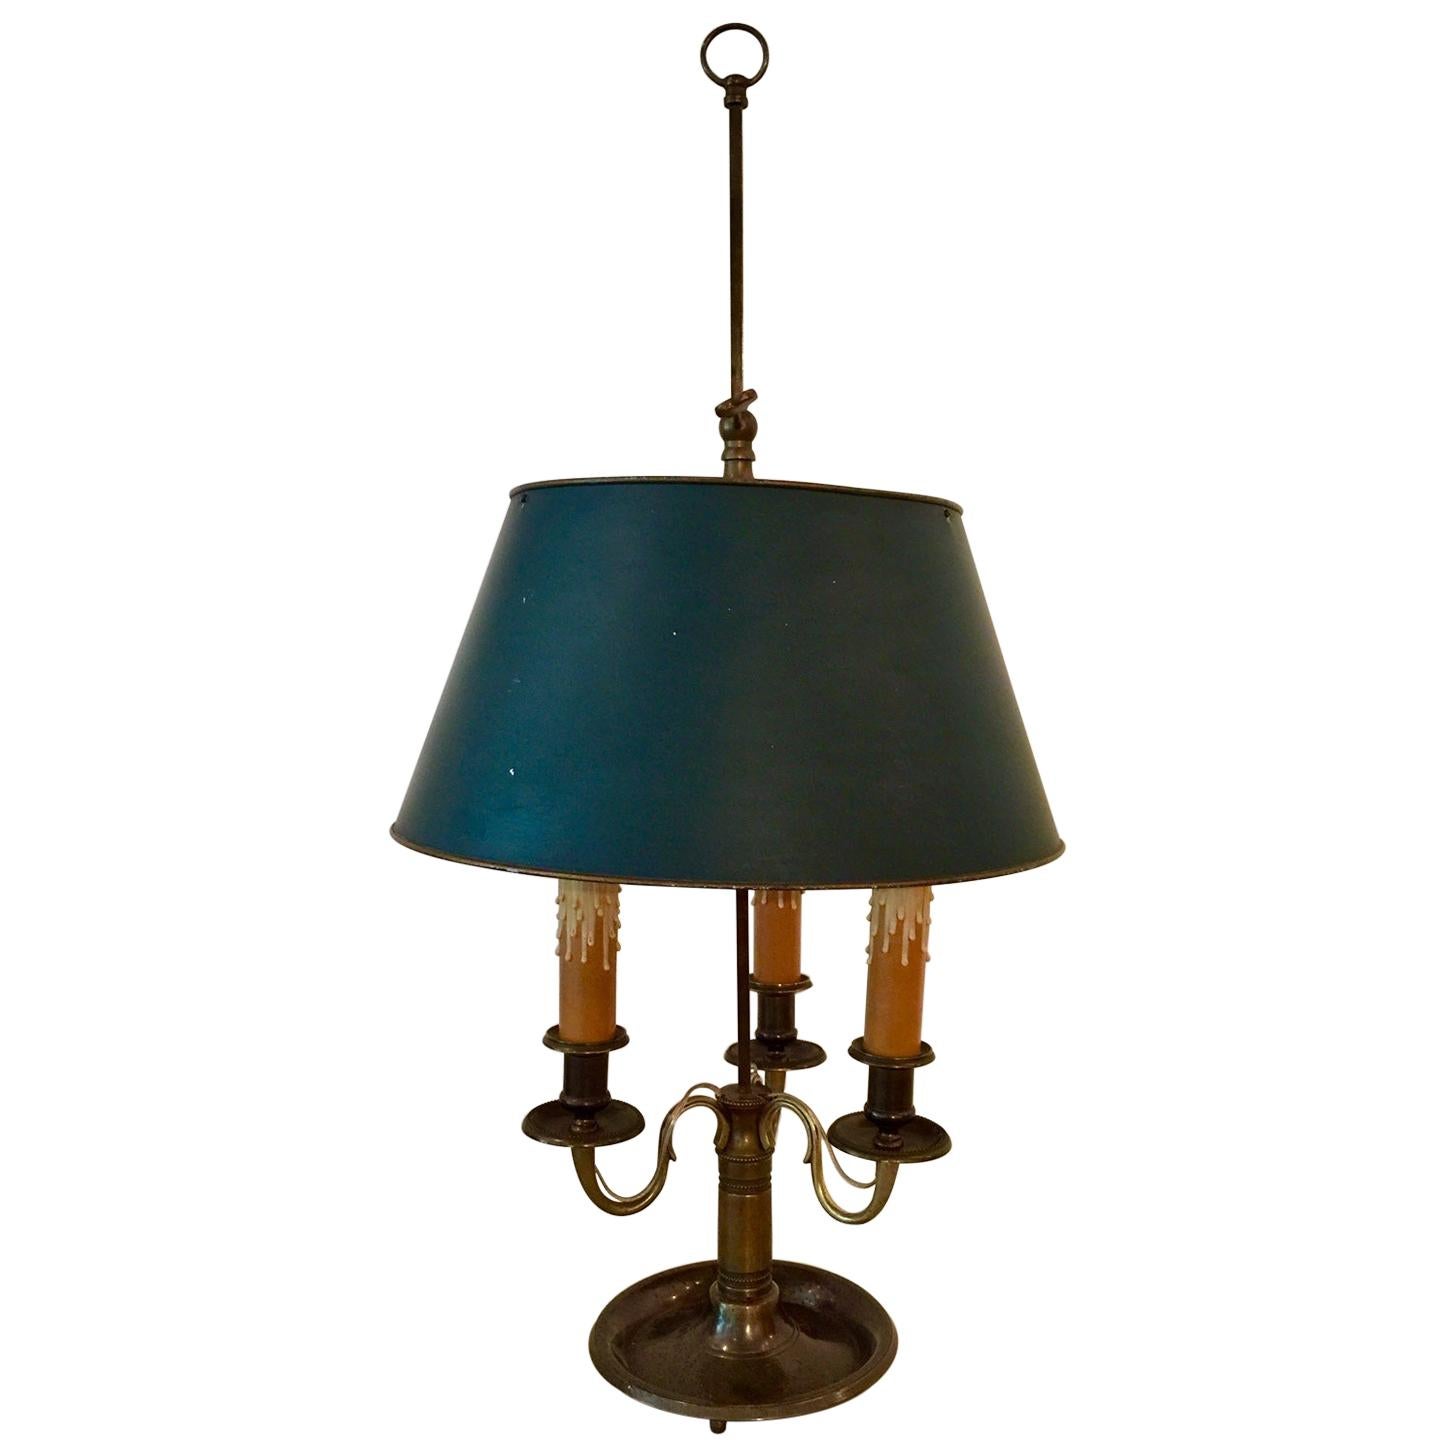 French Bronze Lampe Bouillotte with Dark Green Tôle Shade